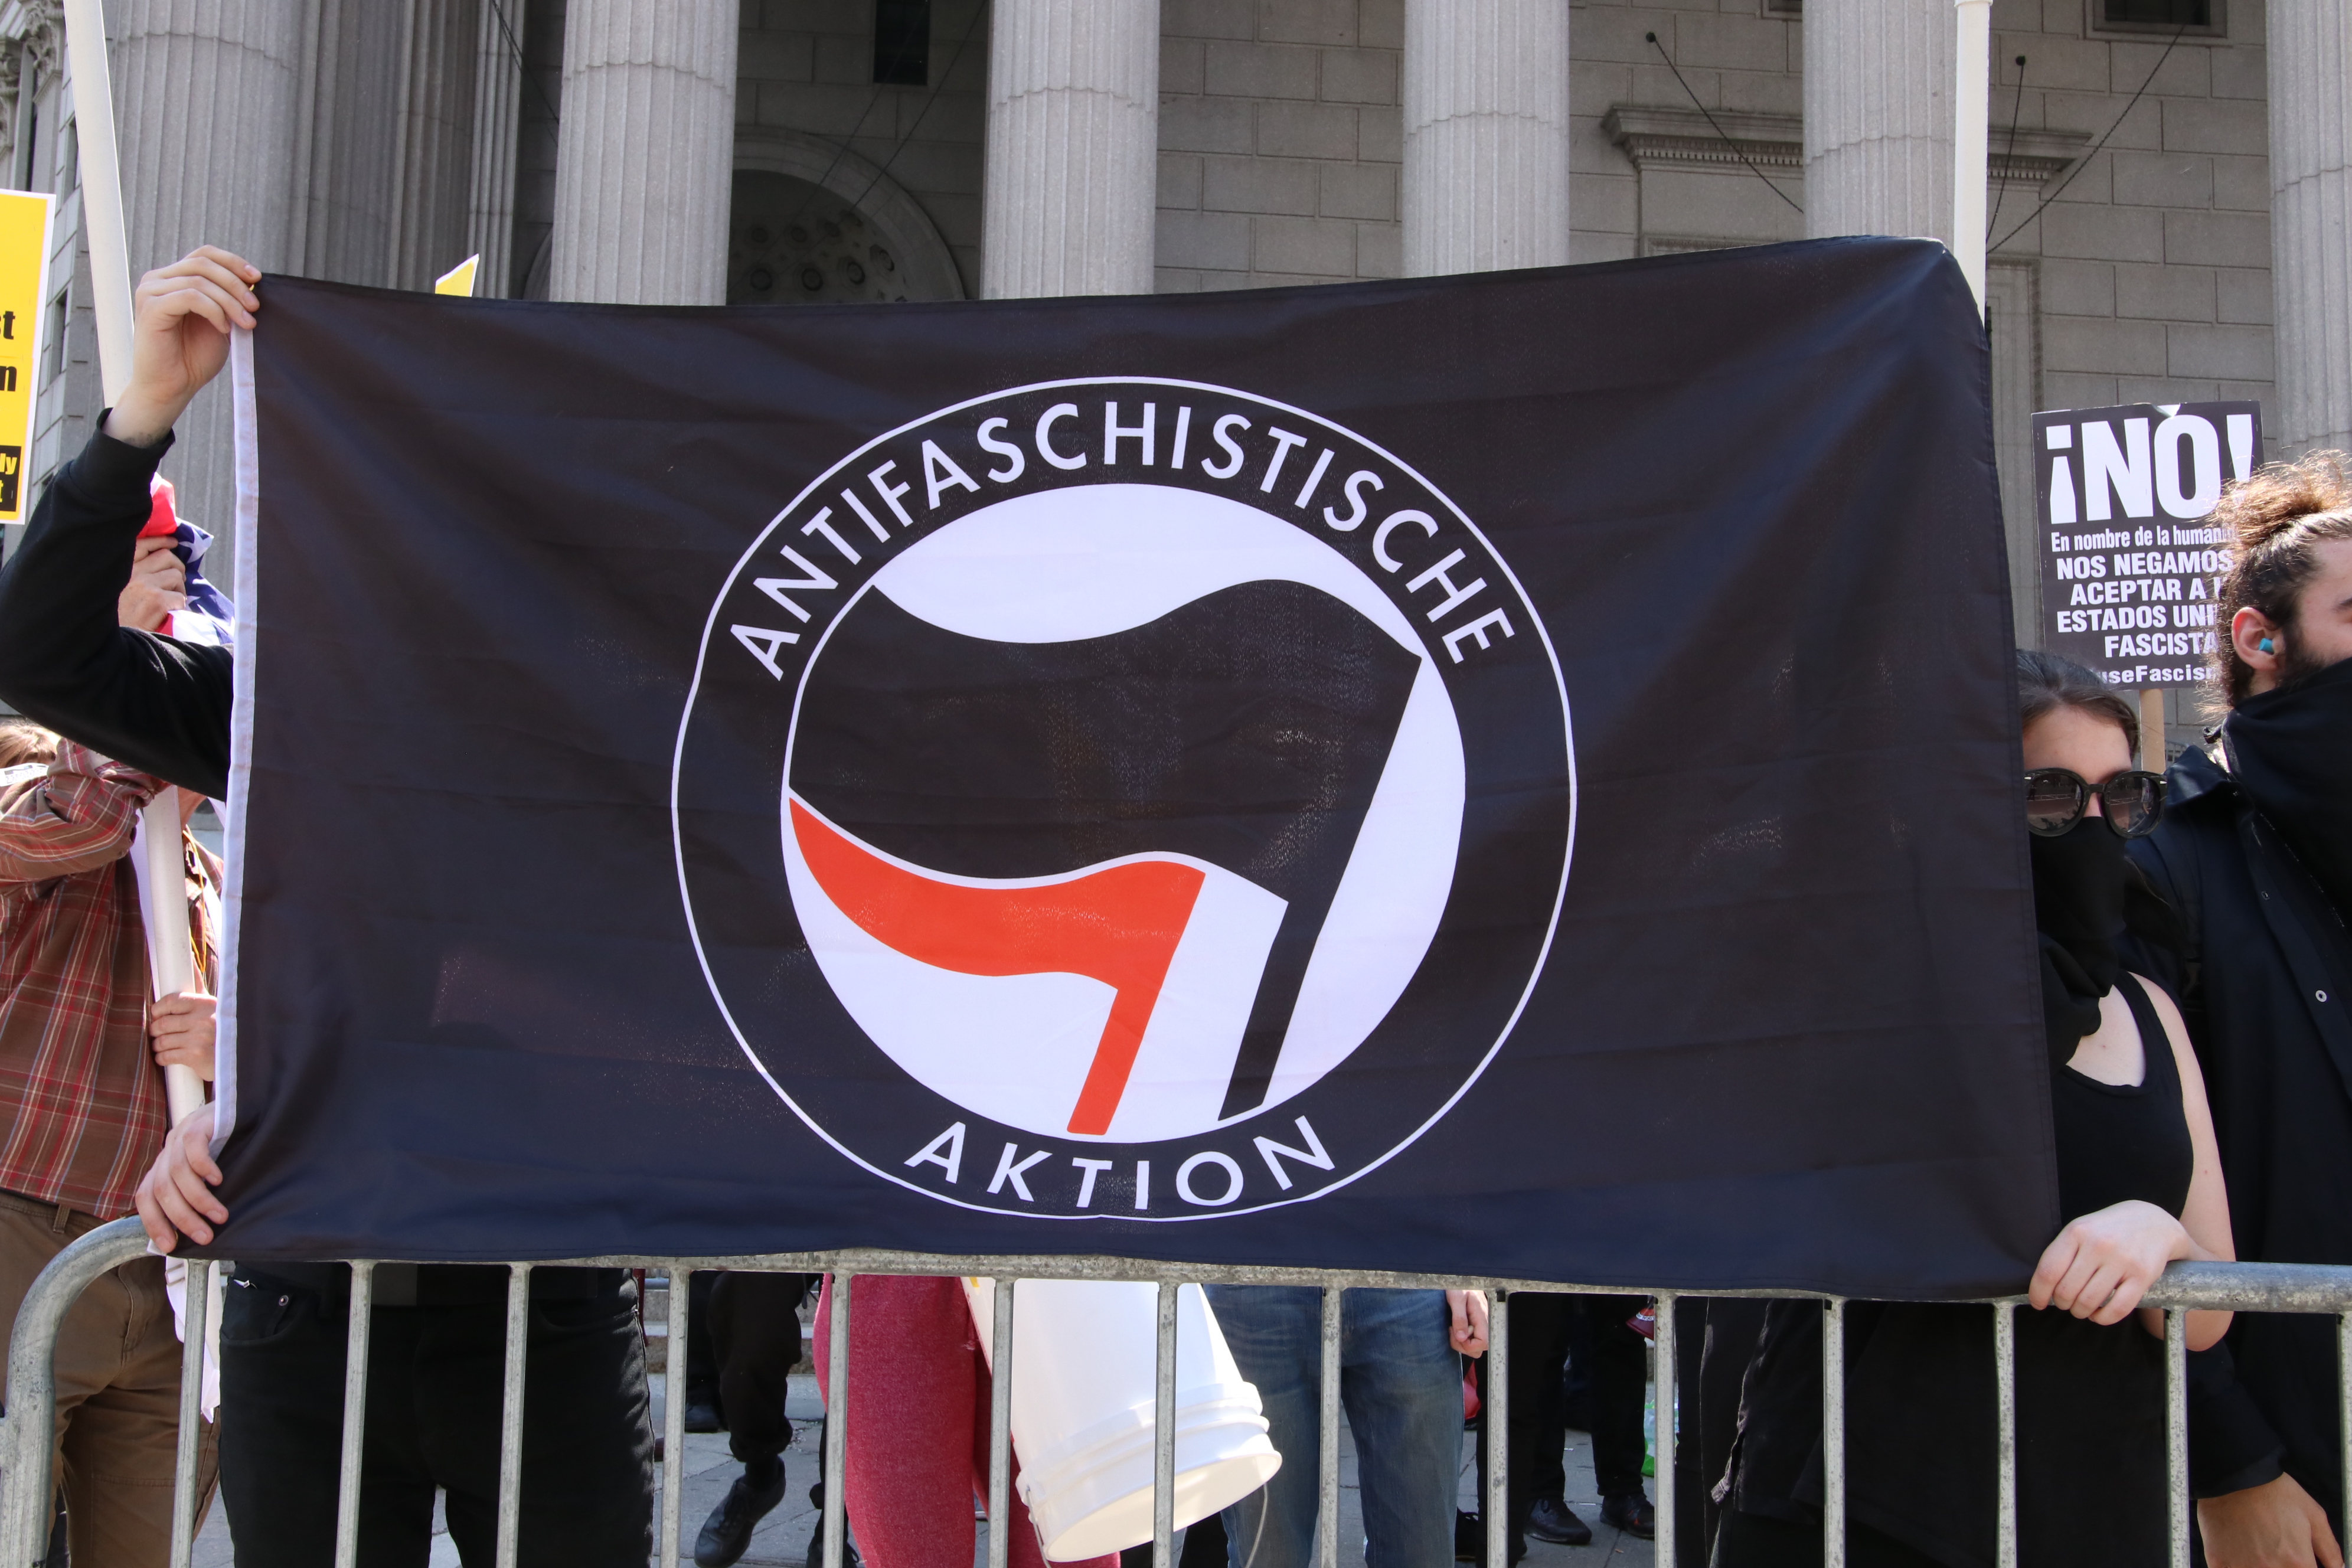 03/28: Antifa and The Battle for the Real Film Screening